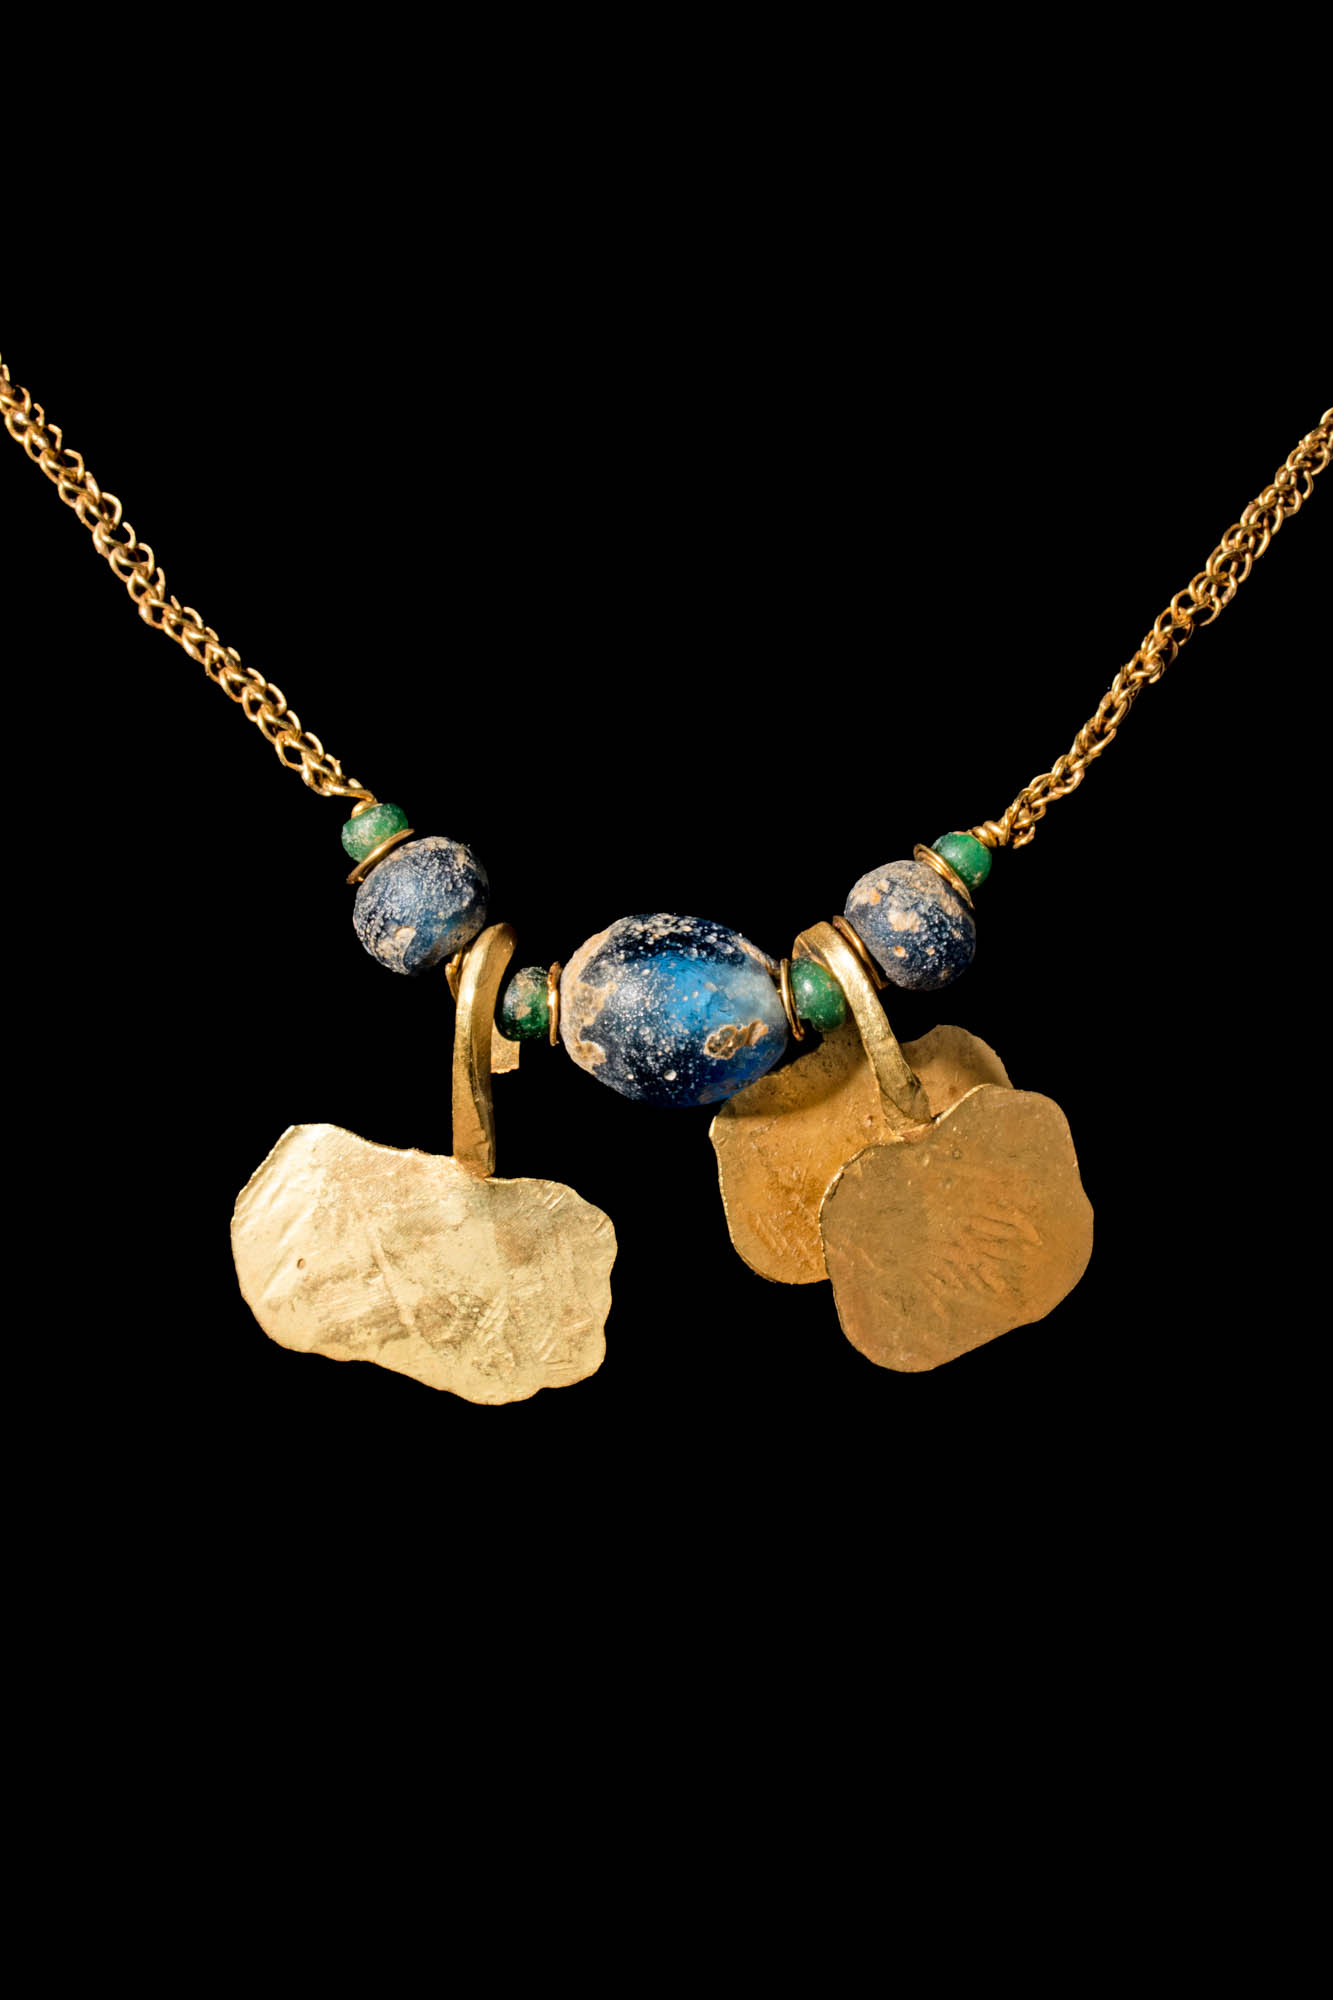 GOLD NECKLACE WITH EGYPTIAN GOLD PENDANTS AND BEADS - Image 4 of 8